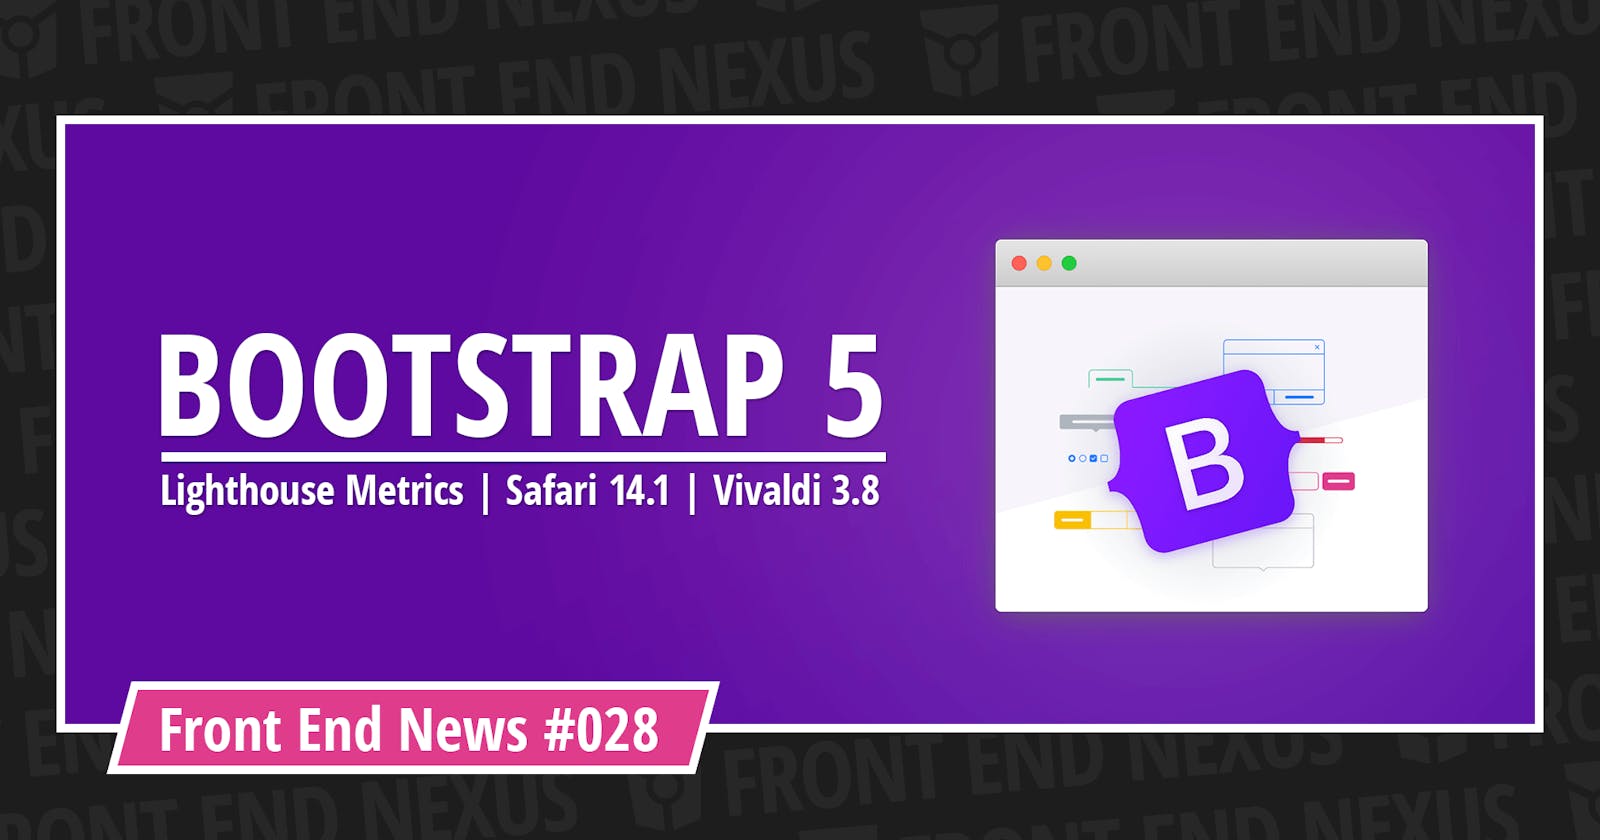 Boostrap 5 is officially out, measure your Web Core Vitals with  Lighthouse Metrics, Safari 14.1, and Vivaldi 3.8 | Front End News #028